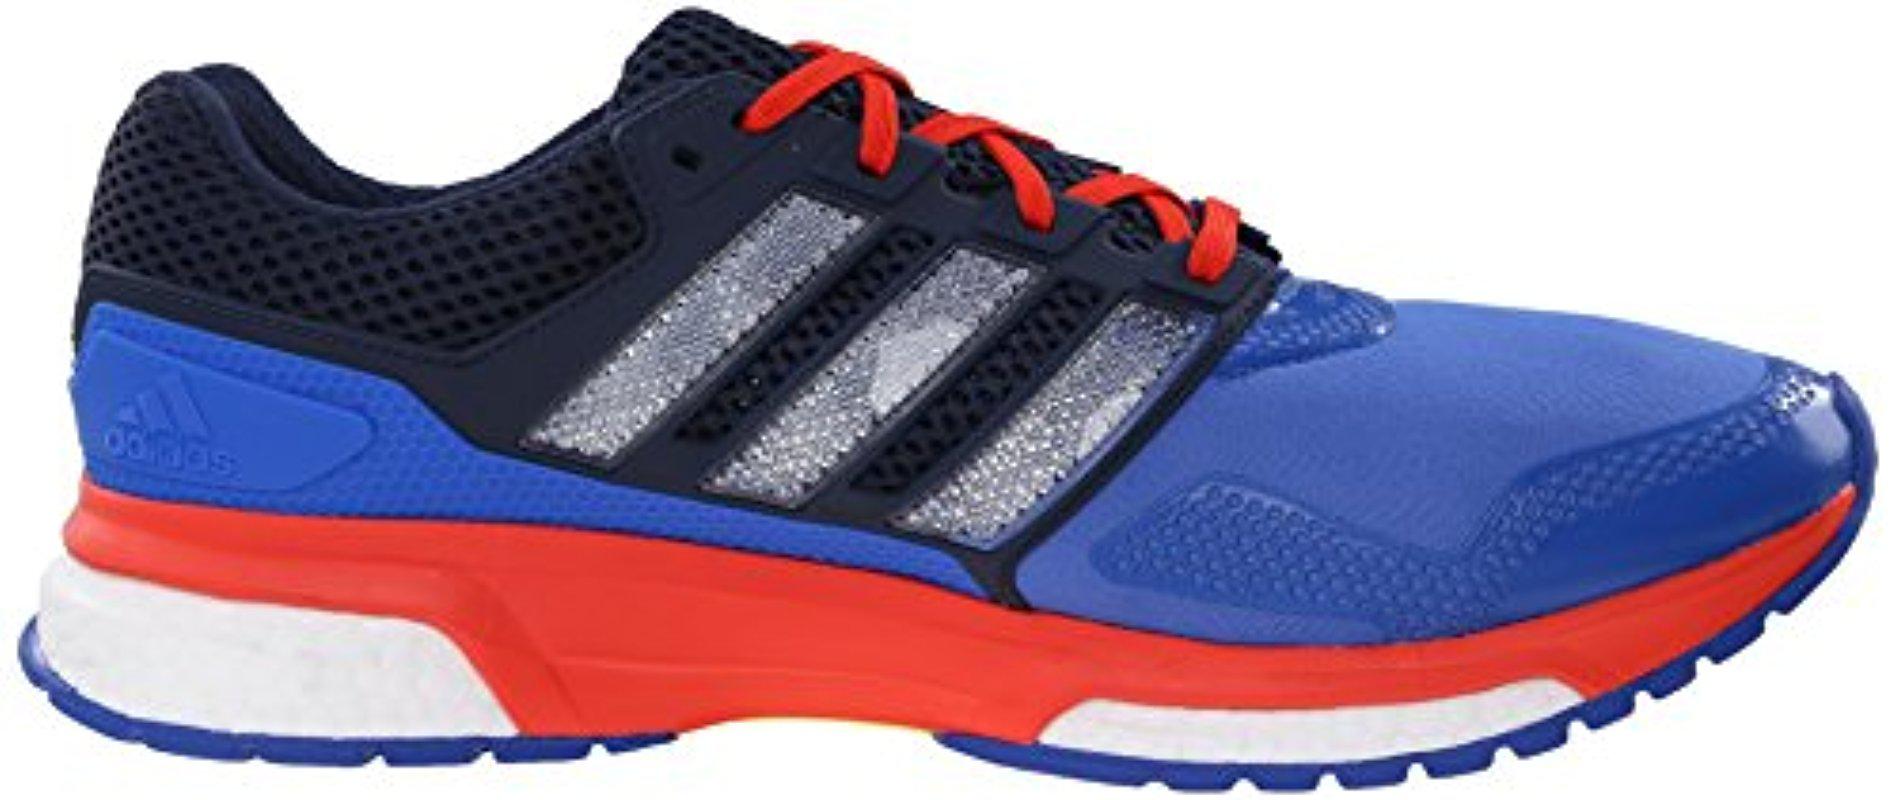 adidas Rubber Response Boost 2 Techfit Running Shoe in Blue for Men - Lyst